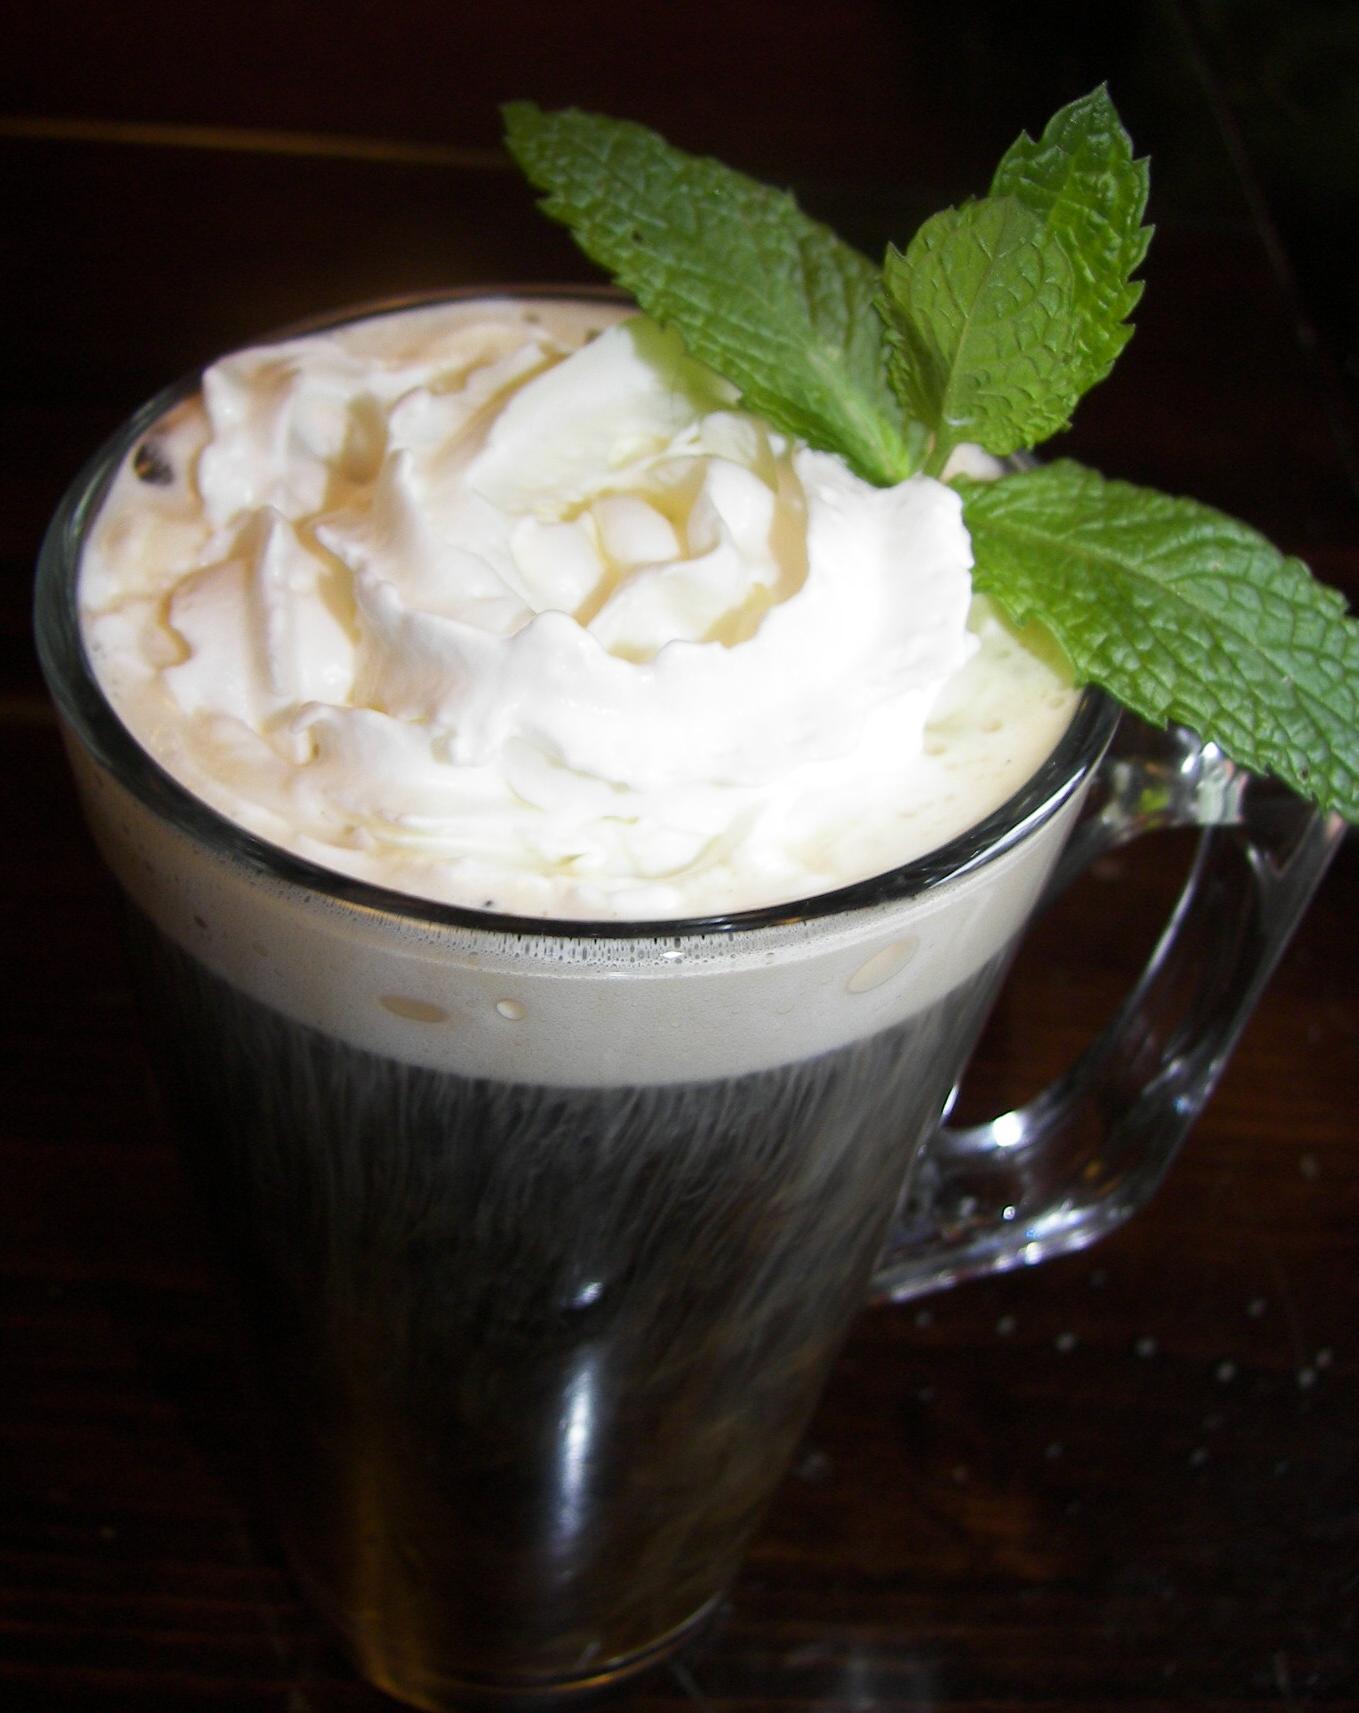  Sit back, relax and sip on this refreshing coffee with mint.